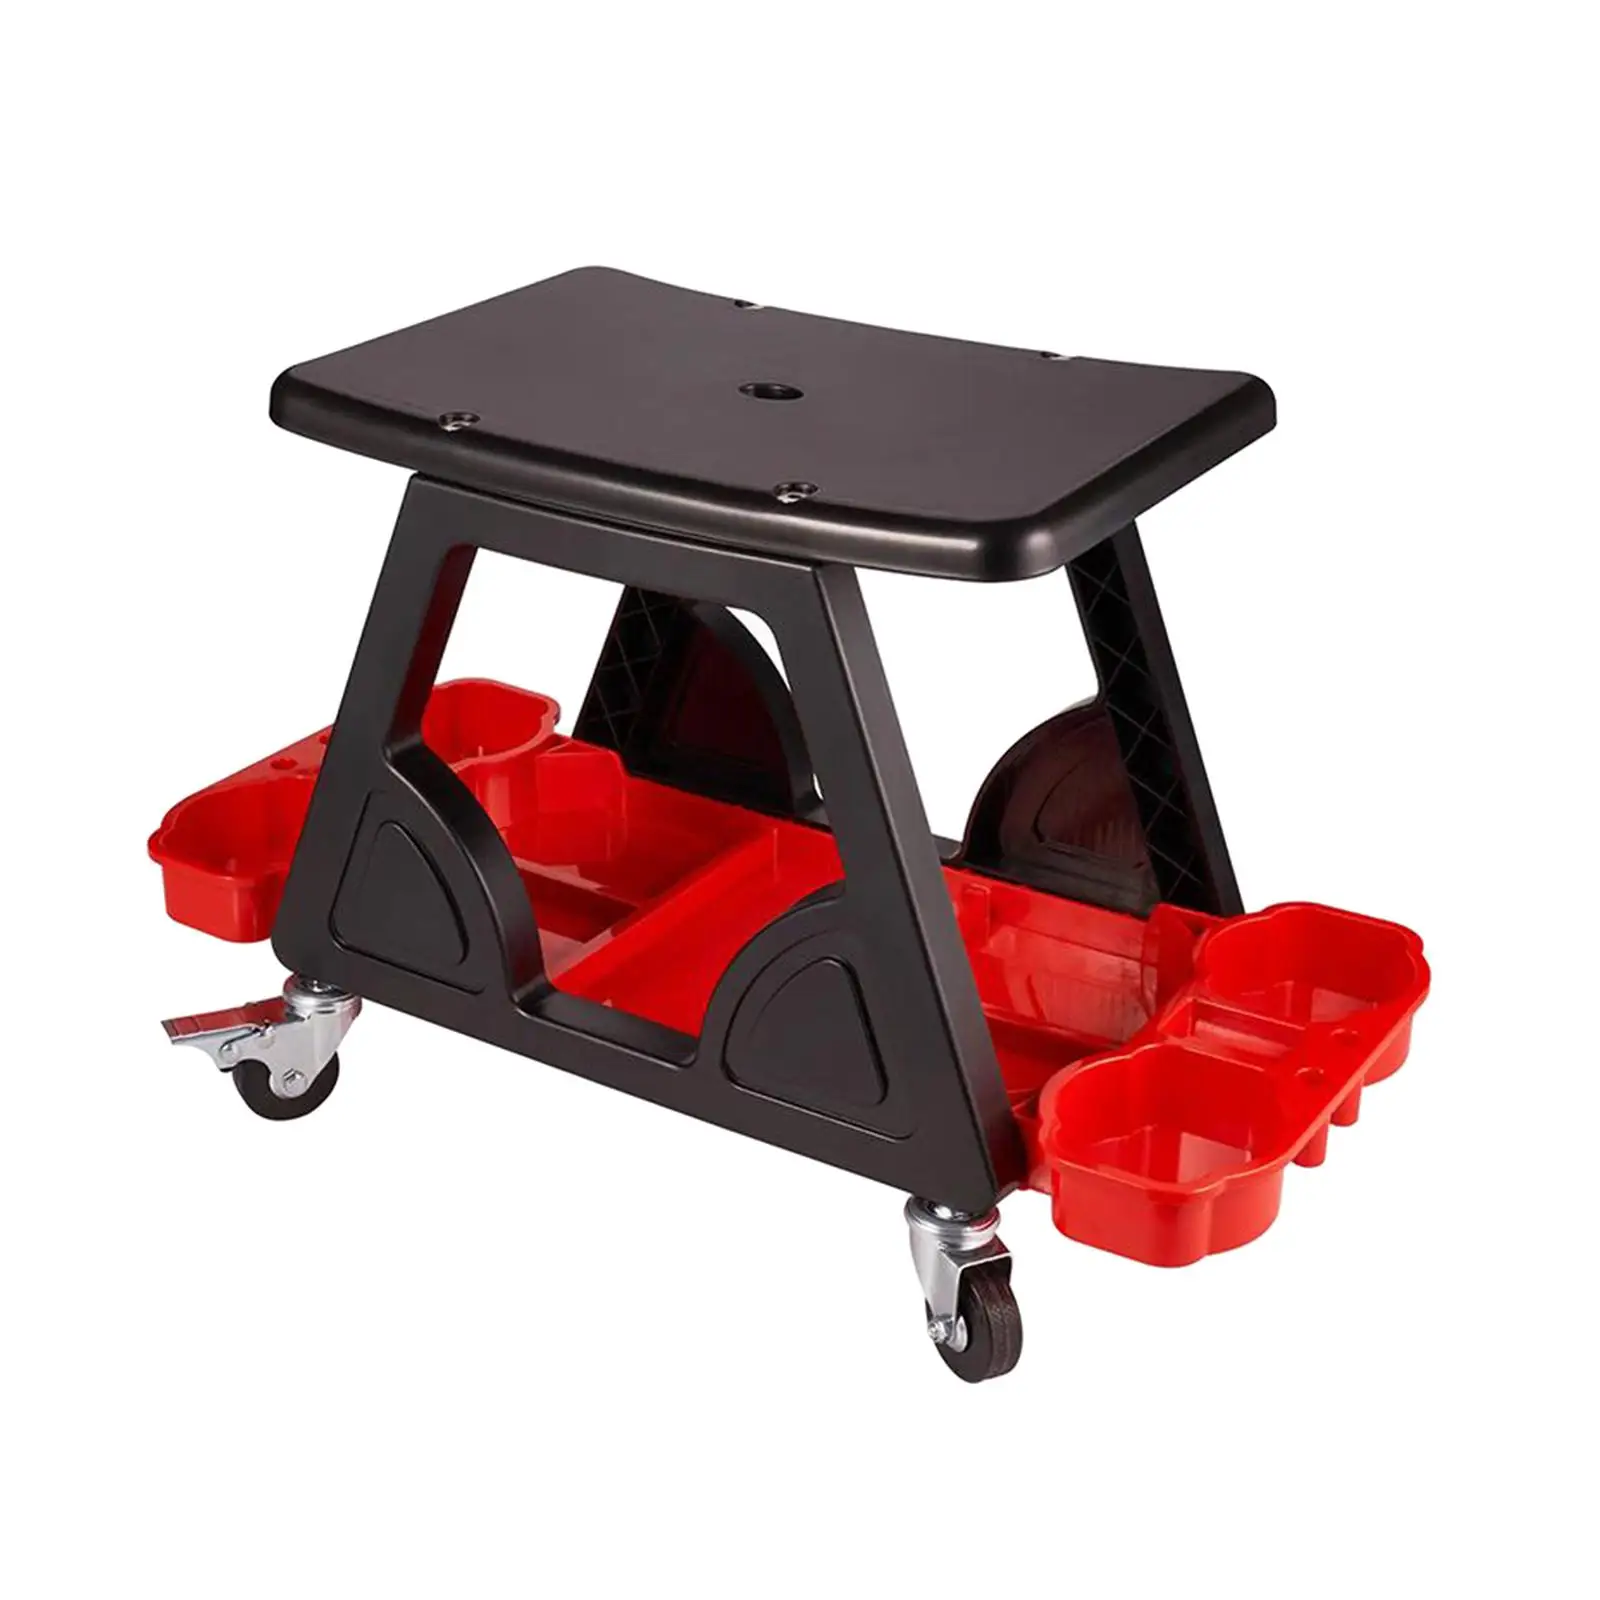 Garage Shop Stool Creeper Car Cleaning with Storage Tray Holder Roller Seat images - 6